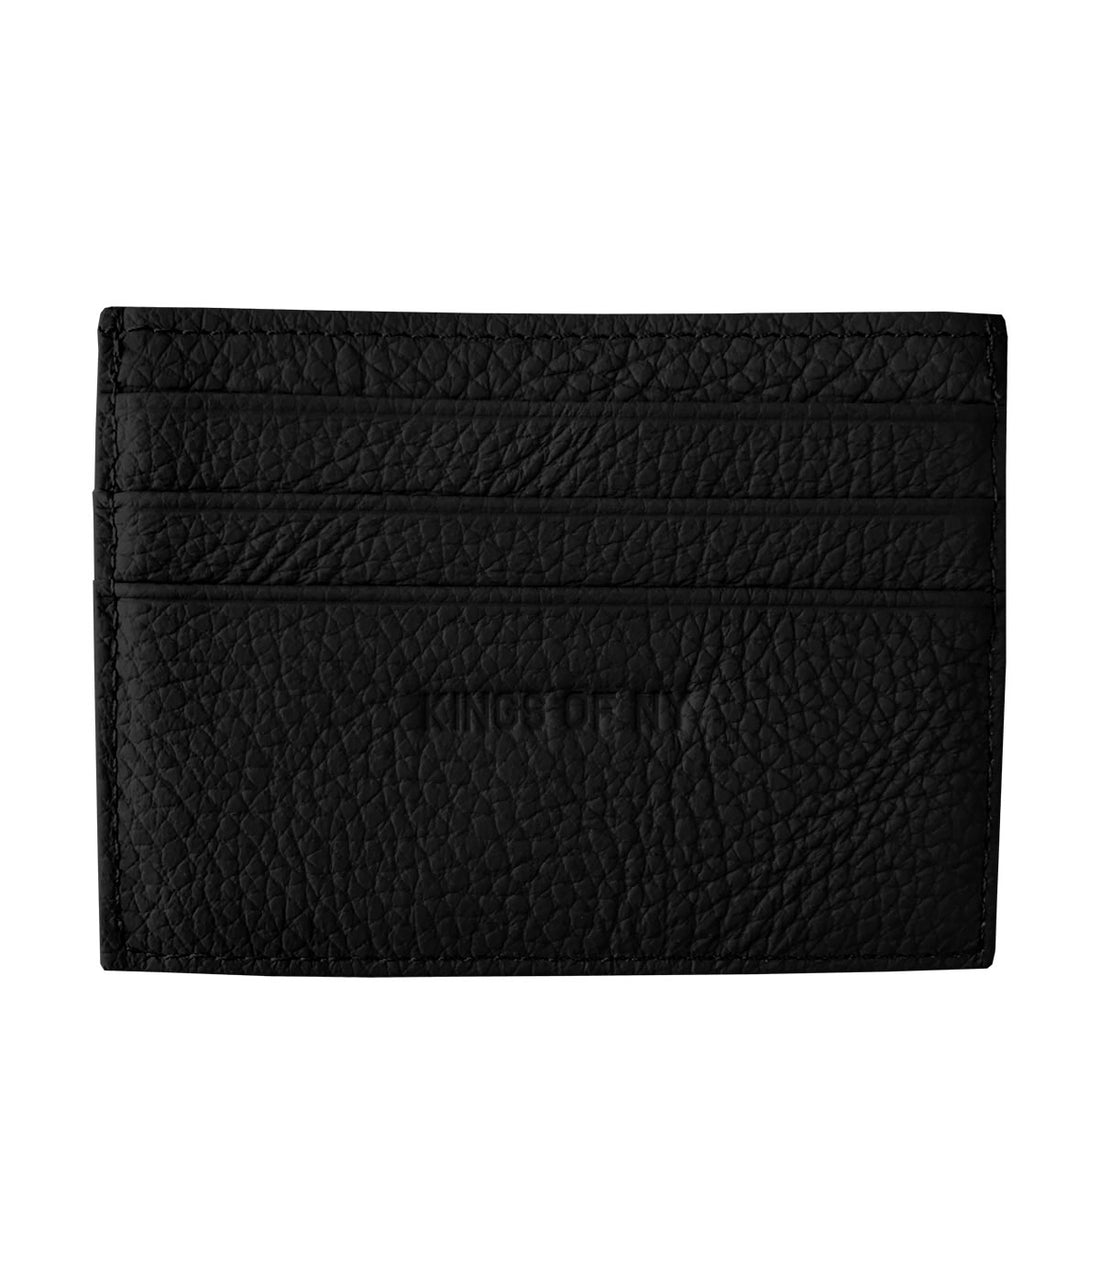 Kings Of NY Pebble Leather Card Holder Wallet Black